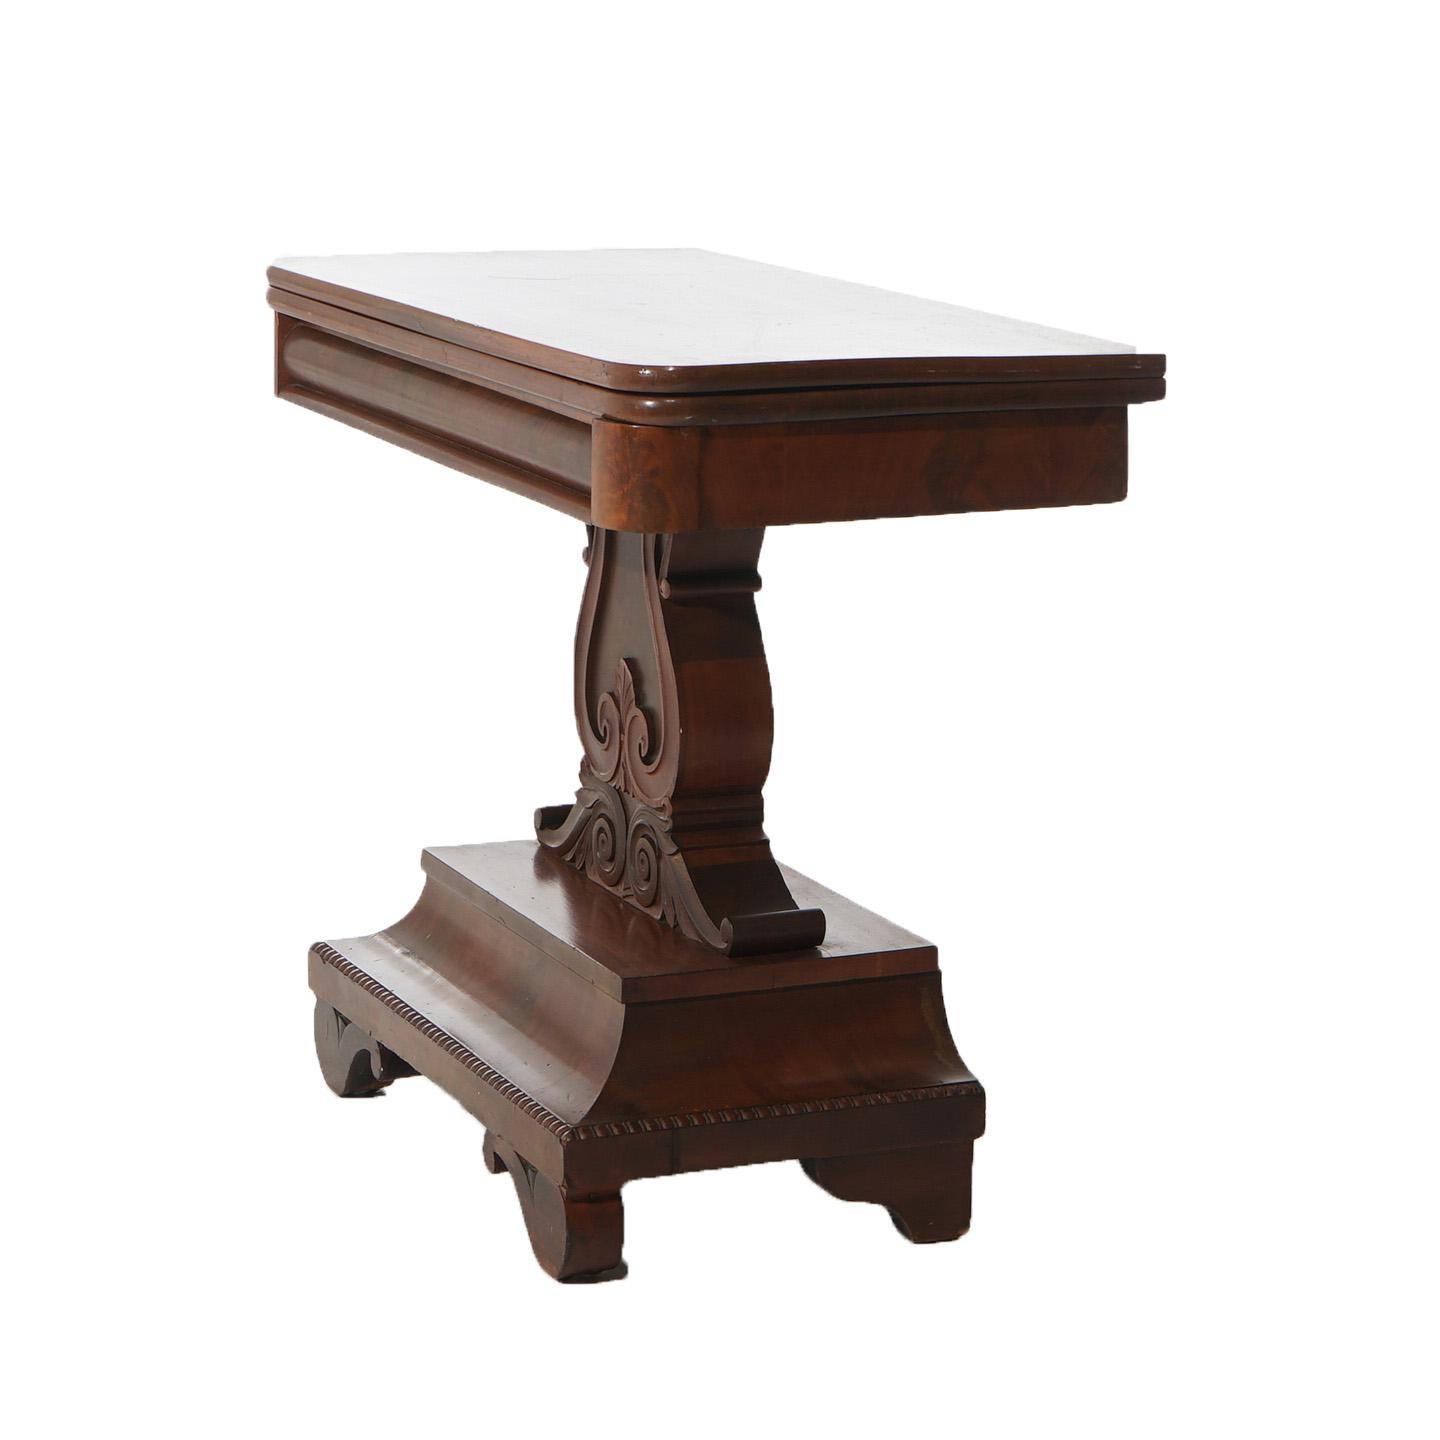 Antique American Empire Neoclassical Greco Flame Mahogany Card Table C1840 For Sale 5